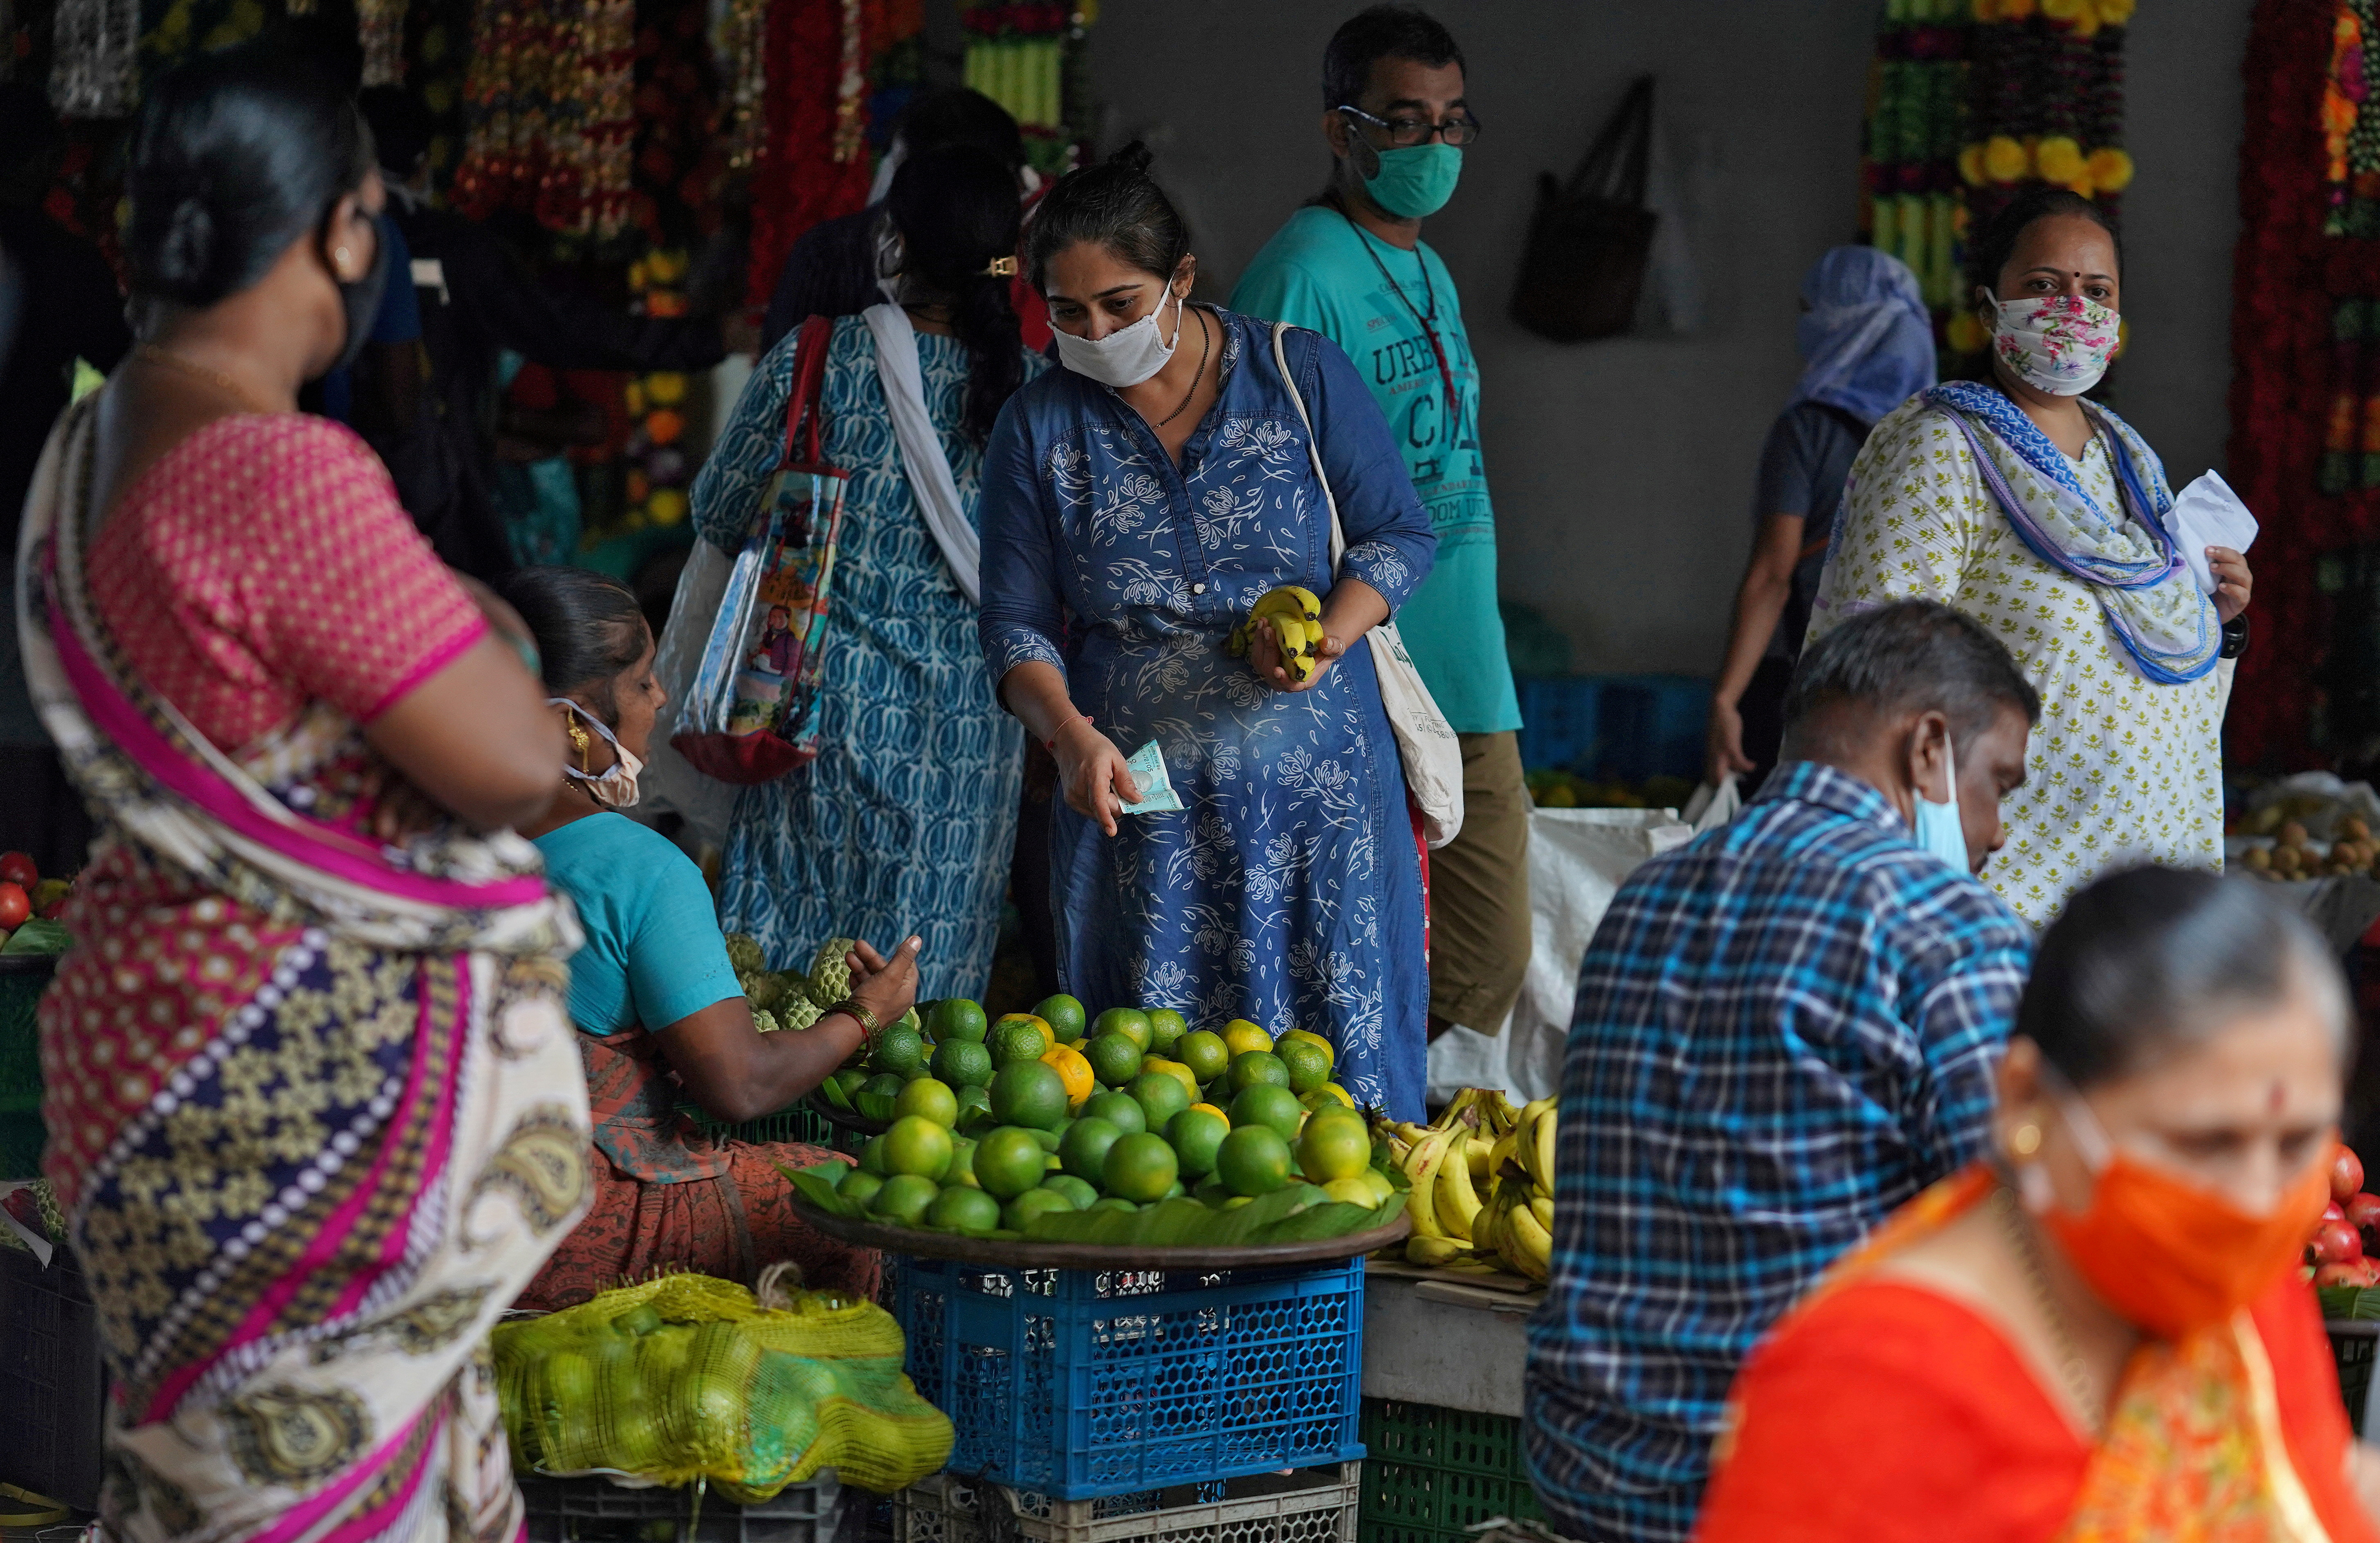 A woman wearing a protective face mask buys fruit in a market, amidst the spread of the coronavirus disease (COVID-19) in Mumbai, India, August 20, 2020. REUTERS/Hemanshi Kamani/File Photo